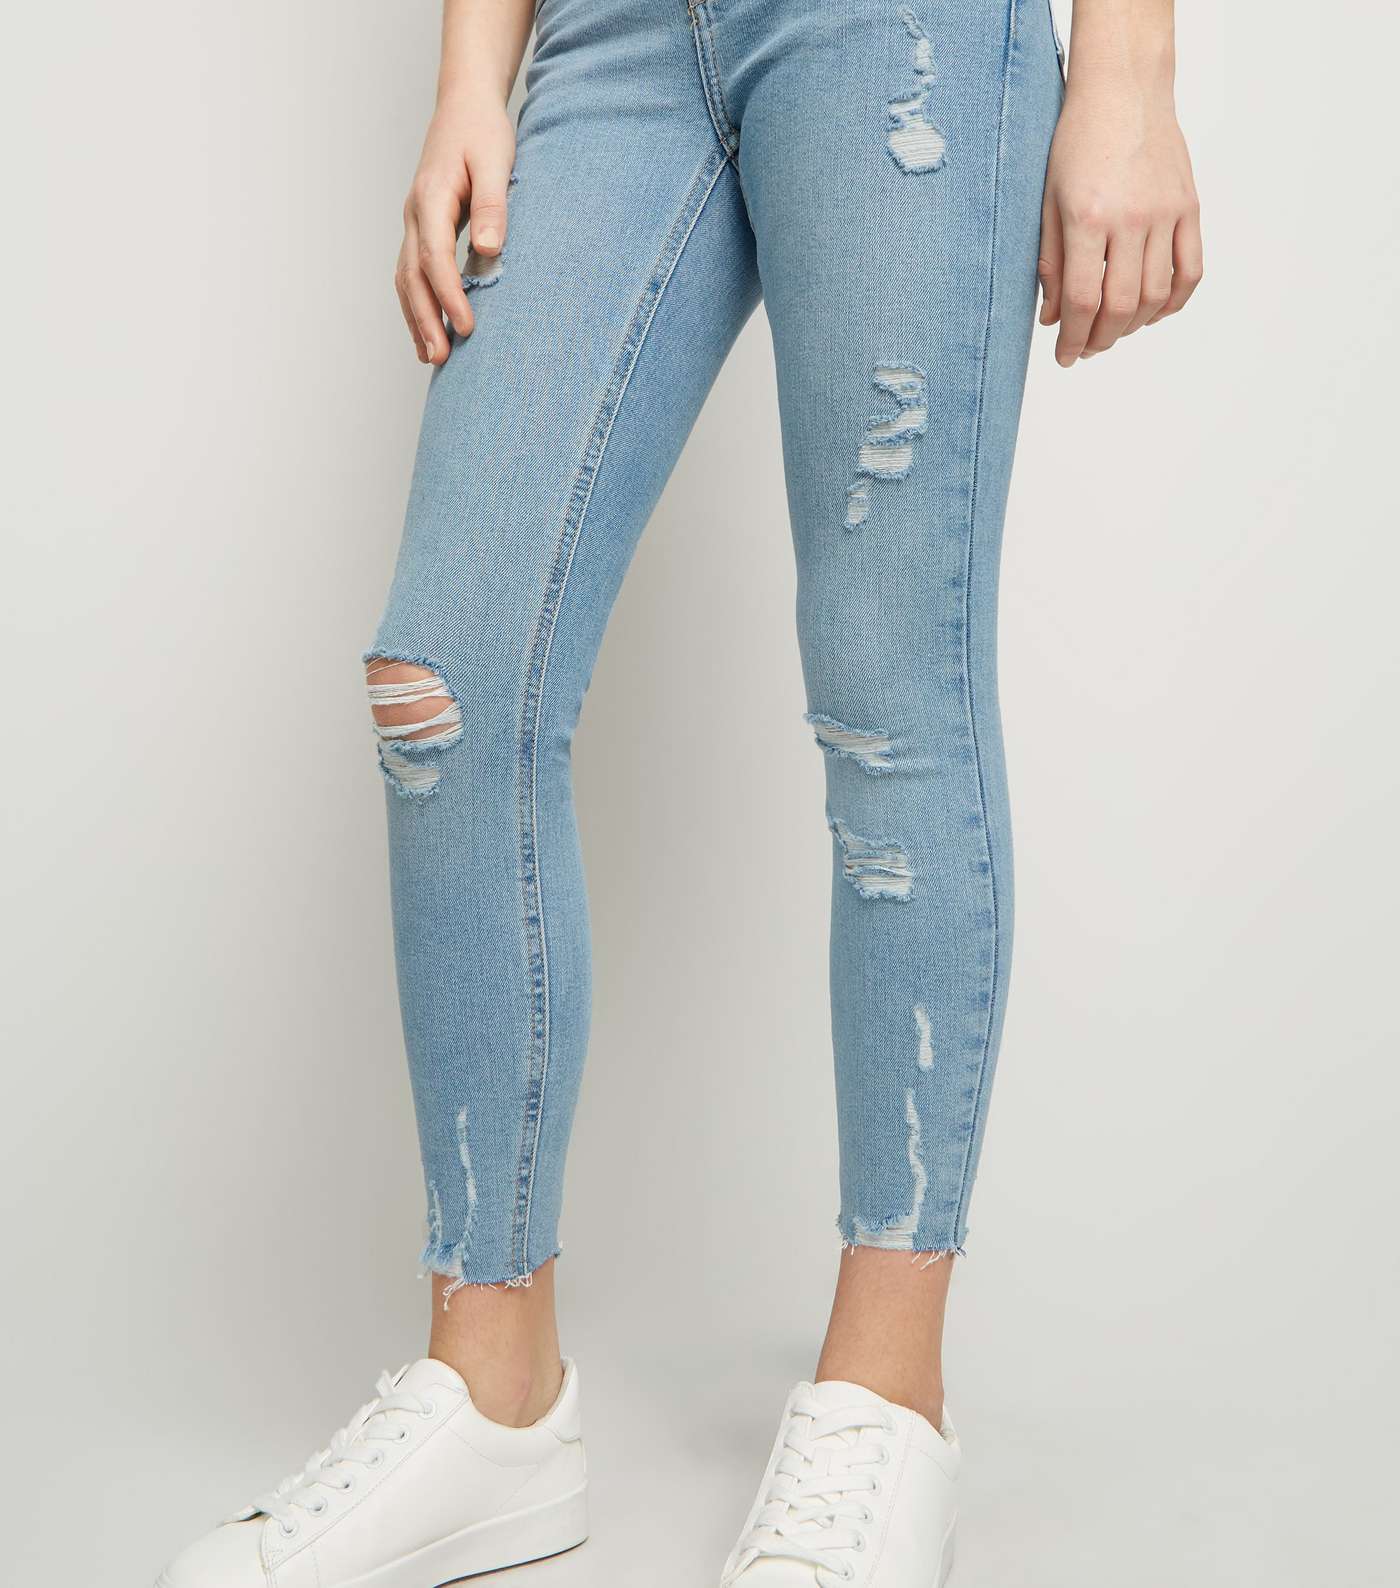 Girls Pale Blue Ripped High Waist Skinny Jeans  Image 3